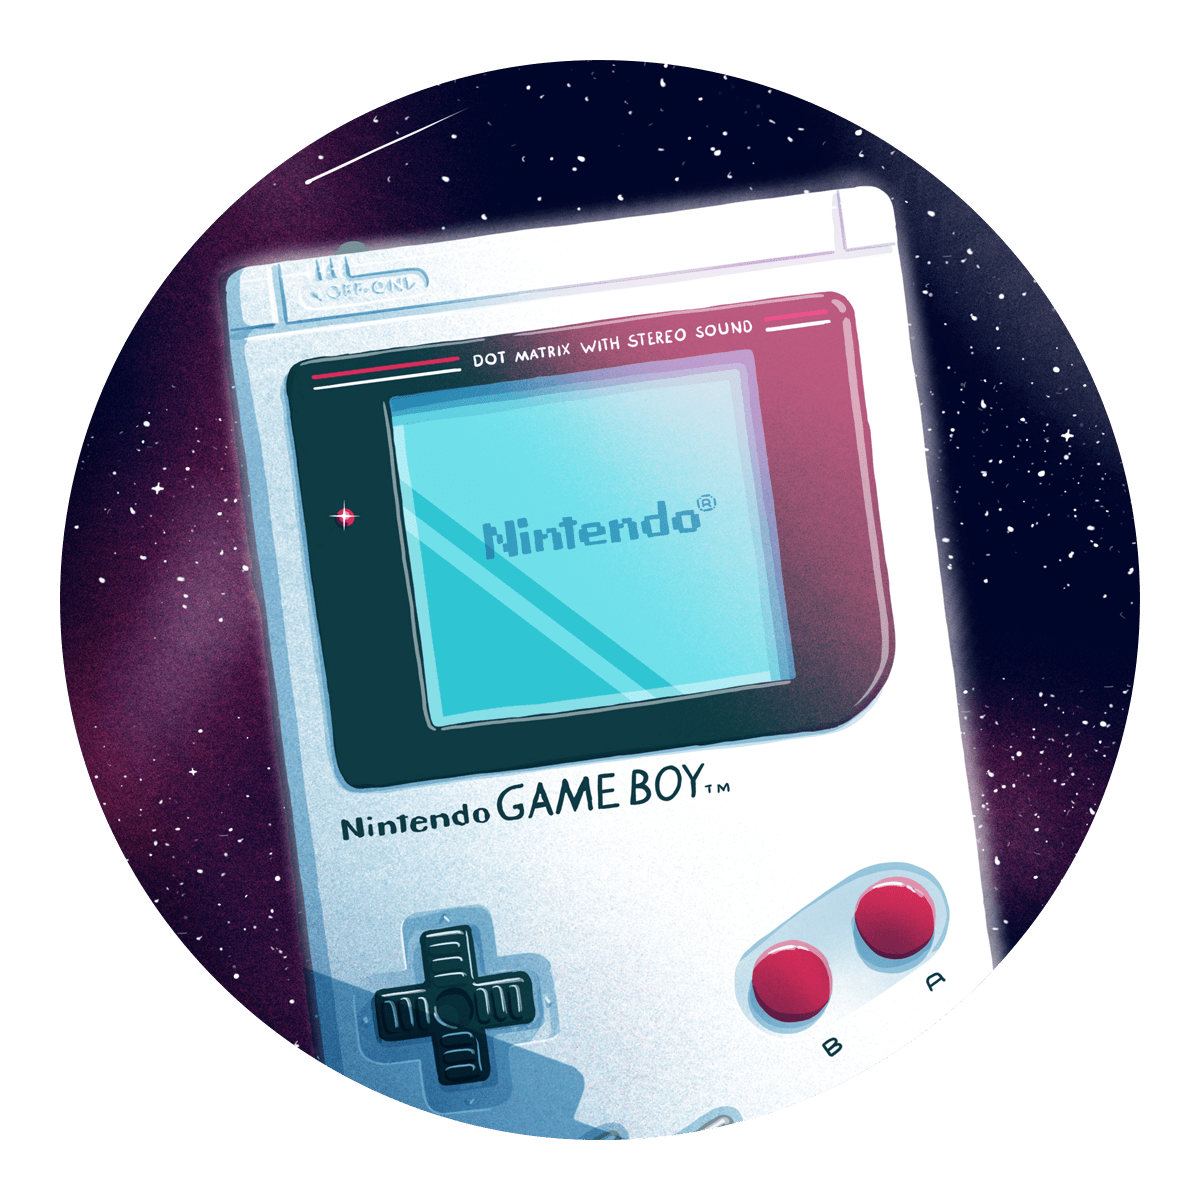 Monochrome Fantasia: Life in the Age of the Game Boy.